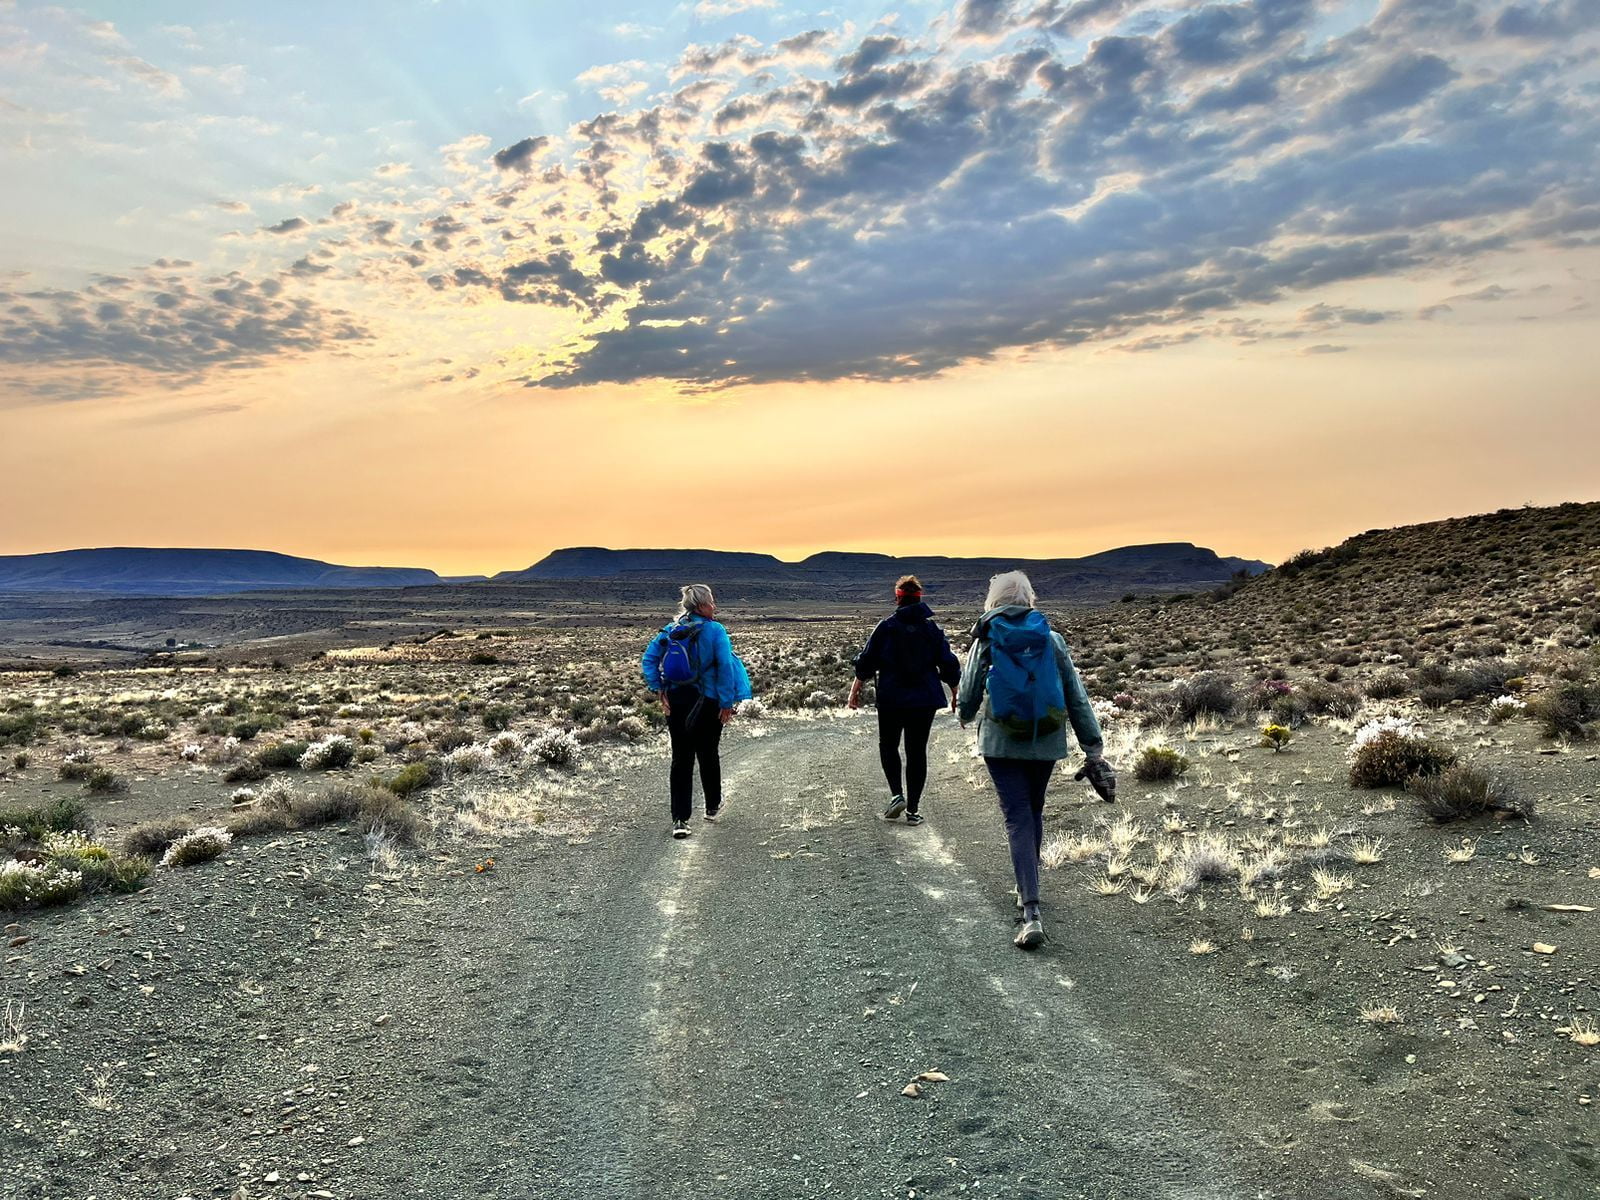 Desert Delights: driving and hiking tours at your own pace and design in the Karoo